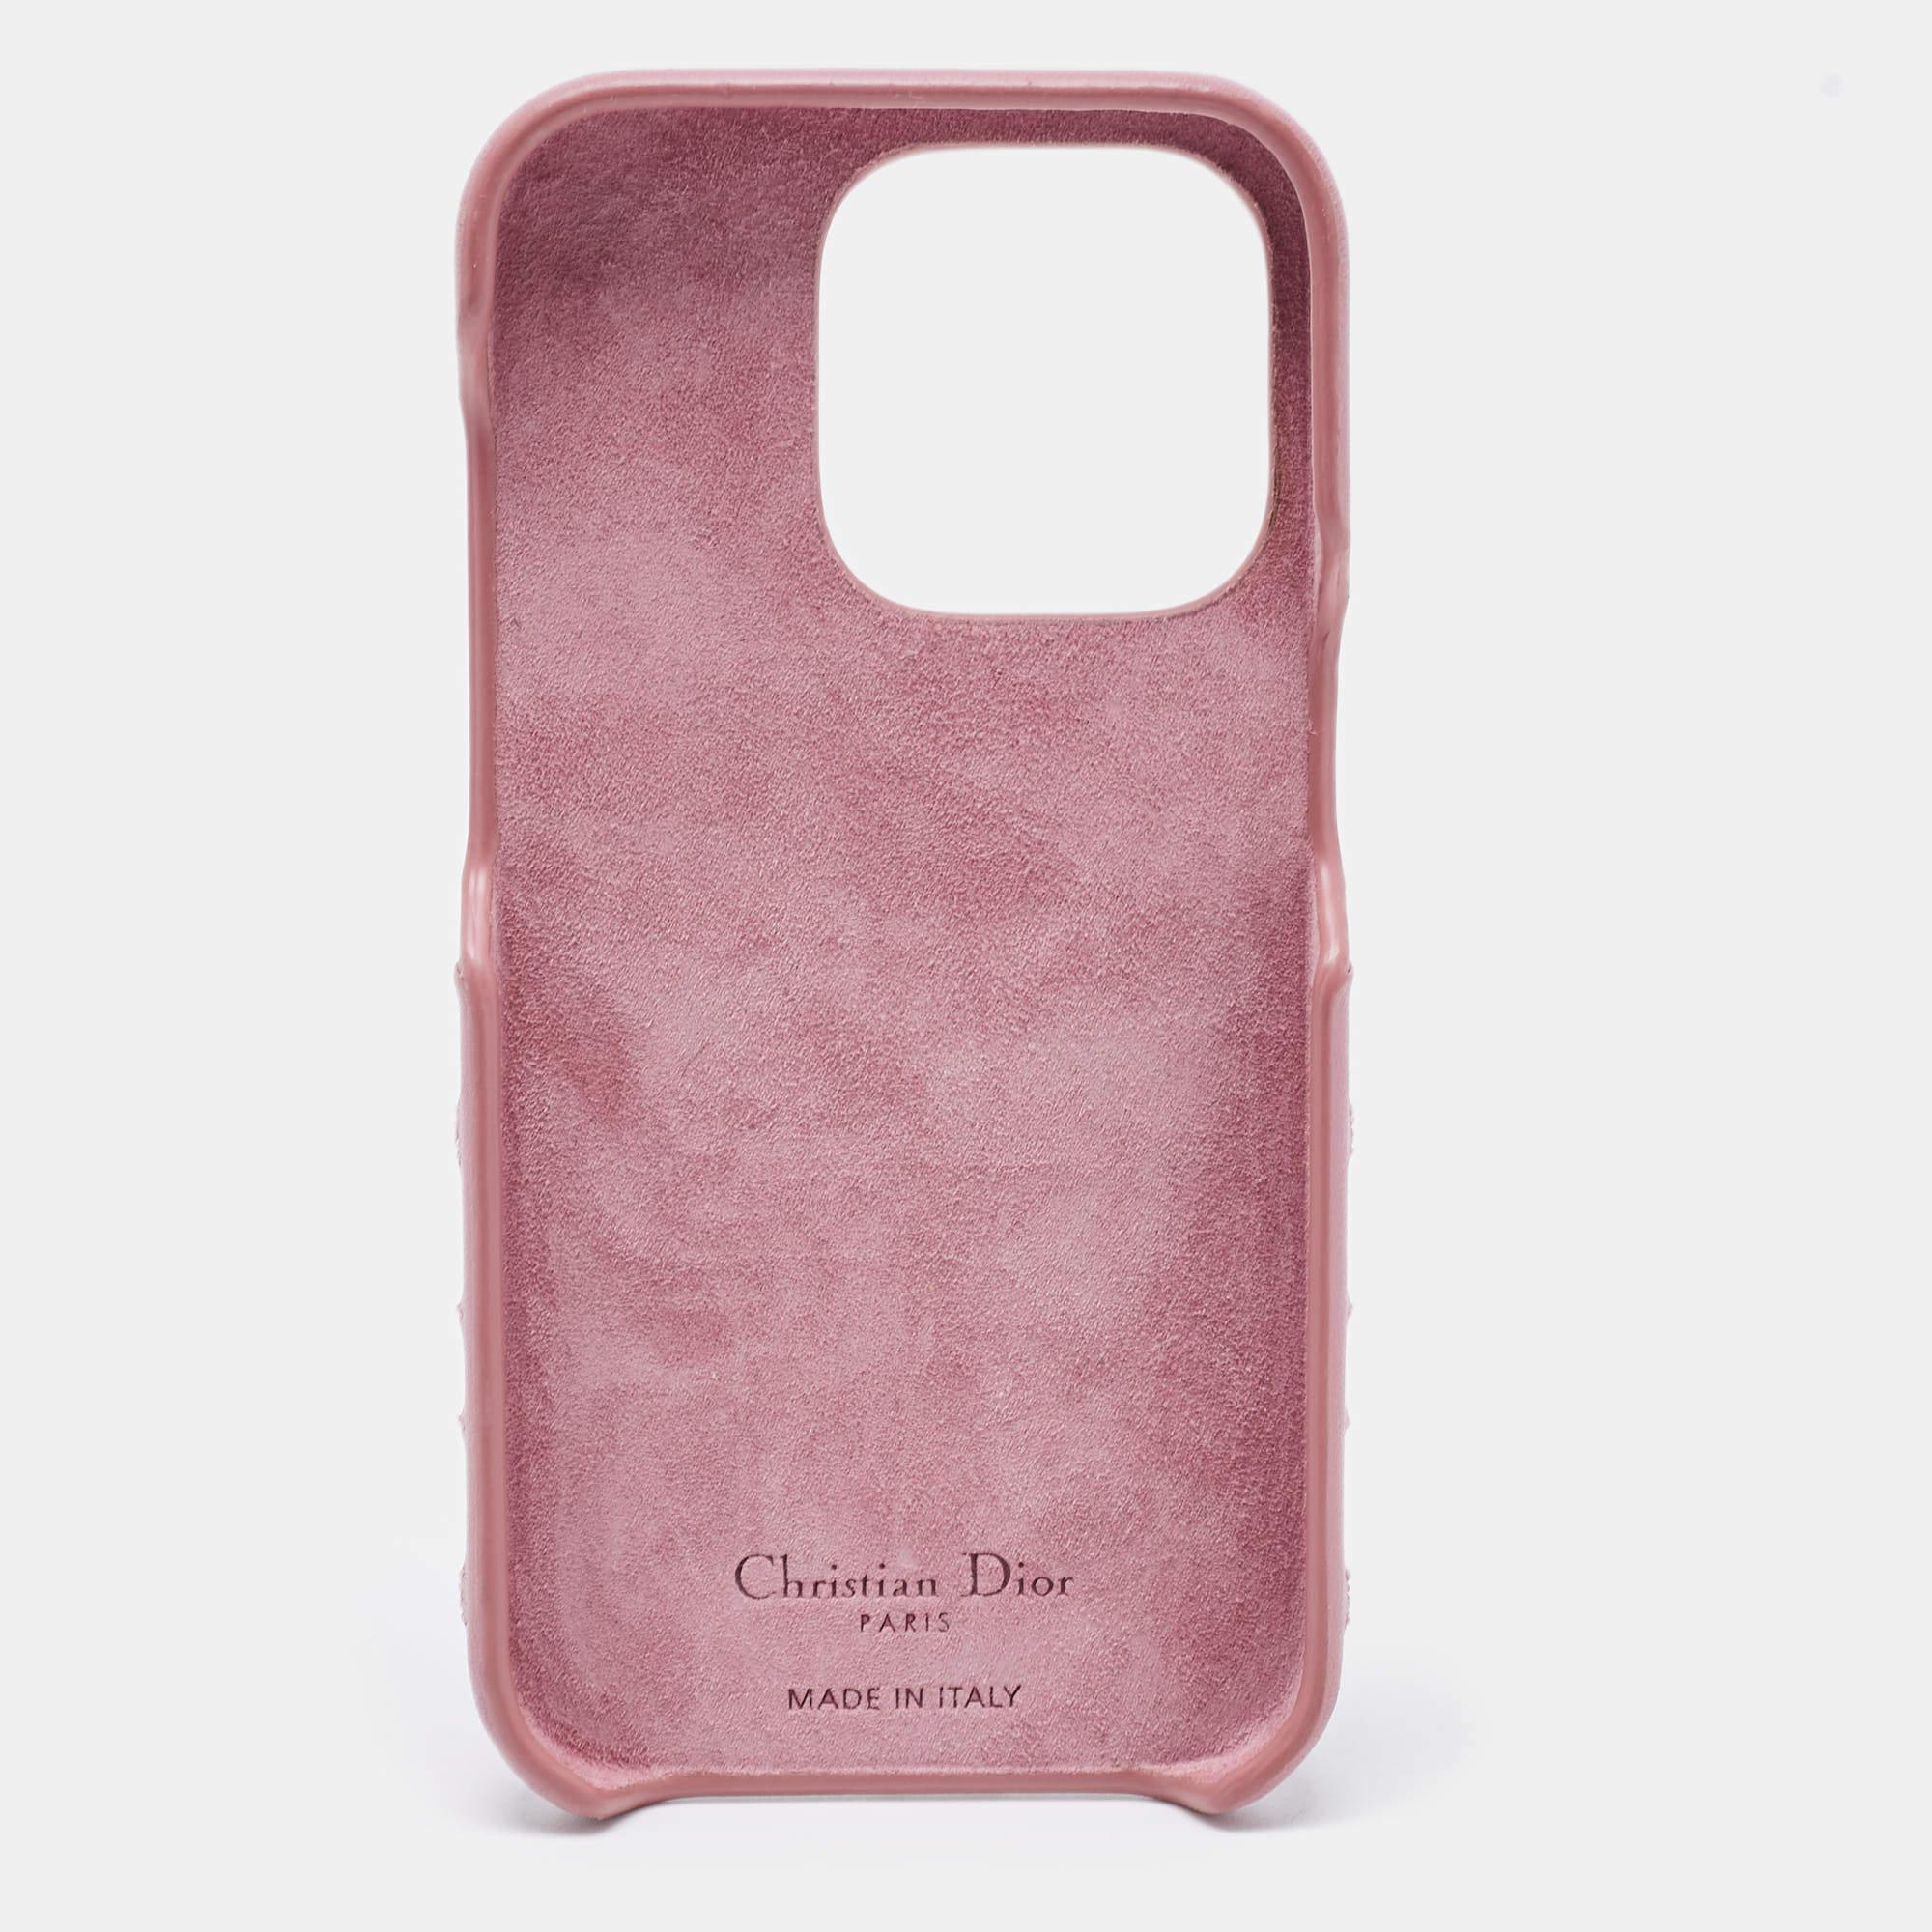 The Dior Lady Dior iPhone 14 Pro Case is a luxurious accessory crafted from high-quality pink Cannage leather. It features the iconic Lady Dior quilting pattern and is designed to protect and enhance the iPhone 14 Pro with elegance and